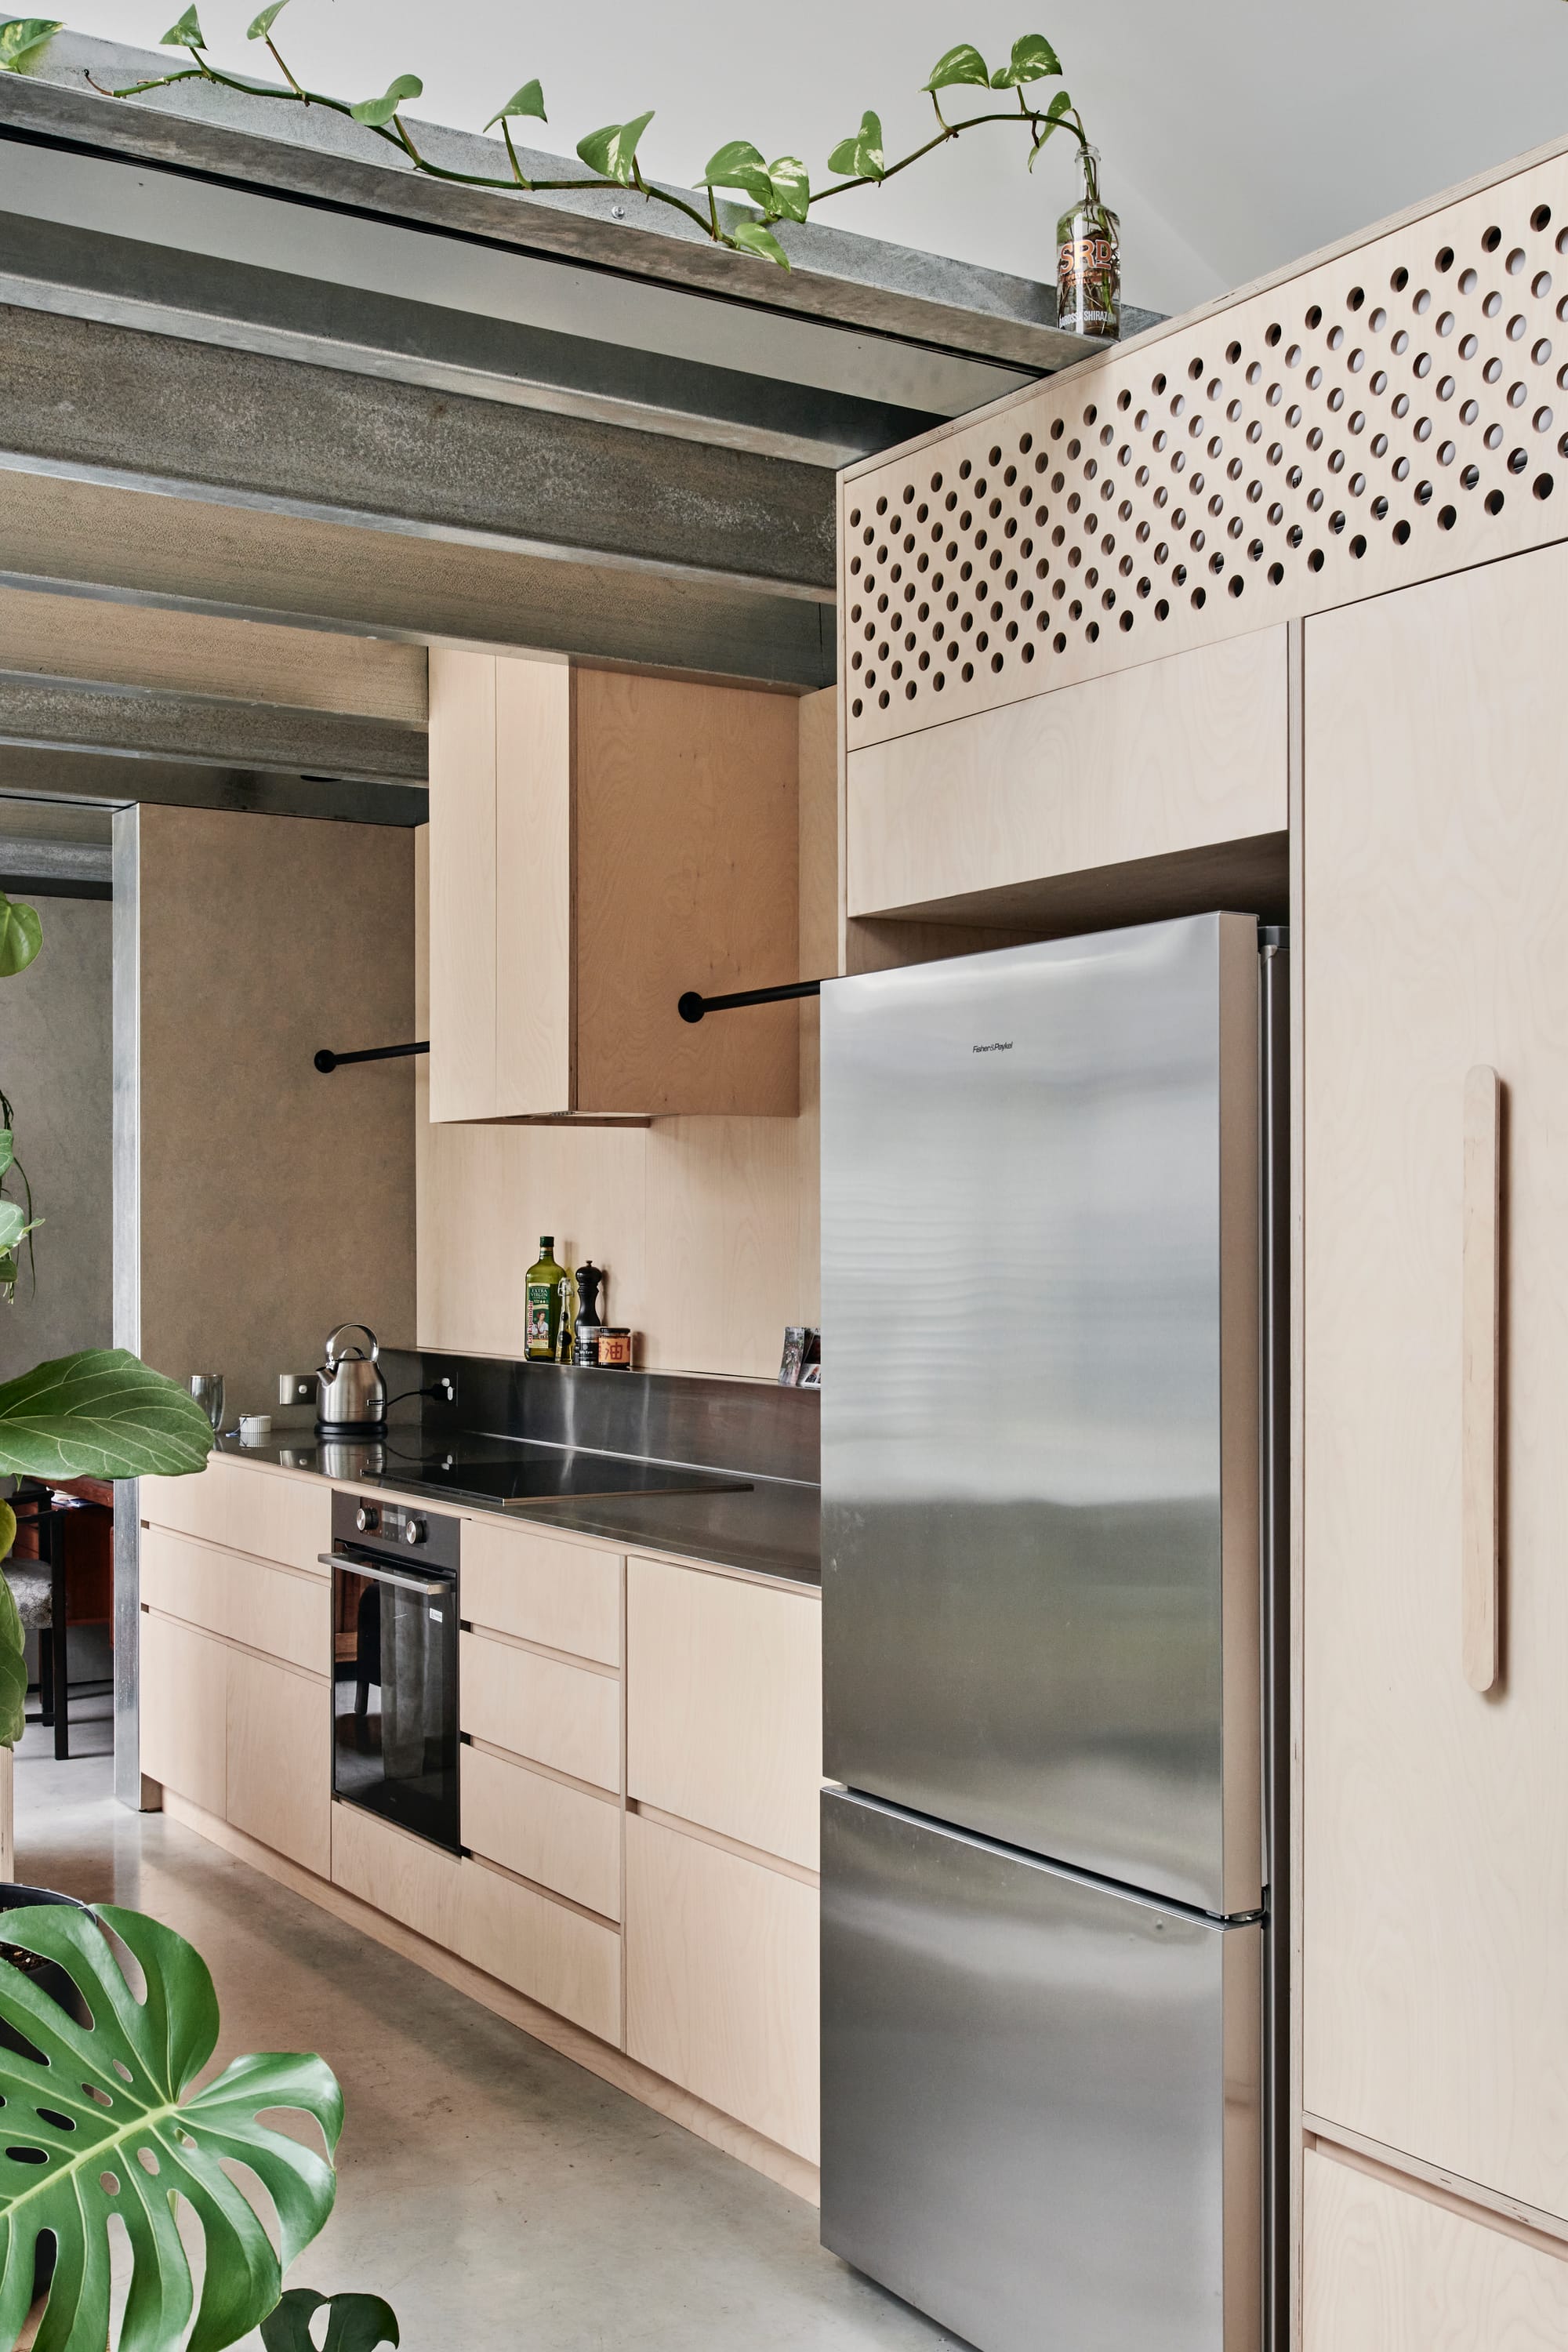 That Old Chestnut by FIGR. Architecture & Design. Photography by Tom Blachford. Galley style kitchen with concrete floors and plywood finished cabinetry. Steel appliances. Exposed steel beams across ceiling. 